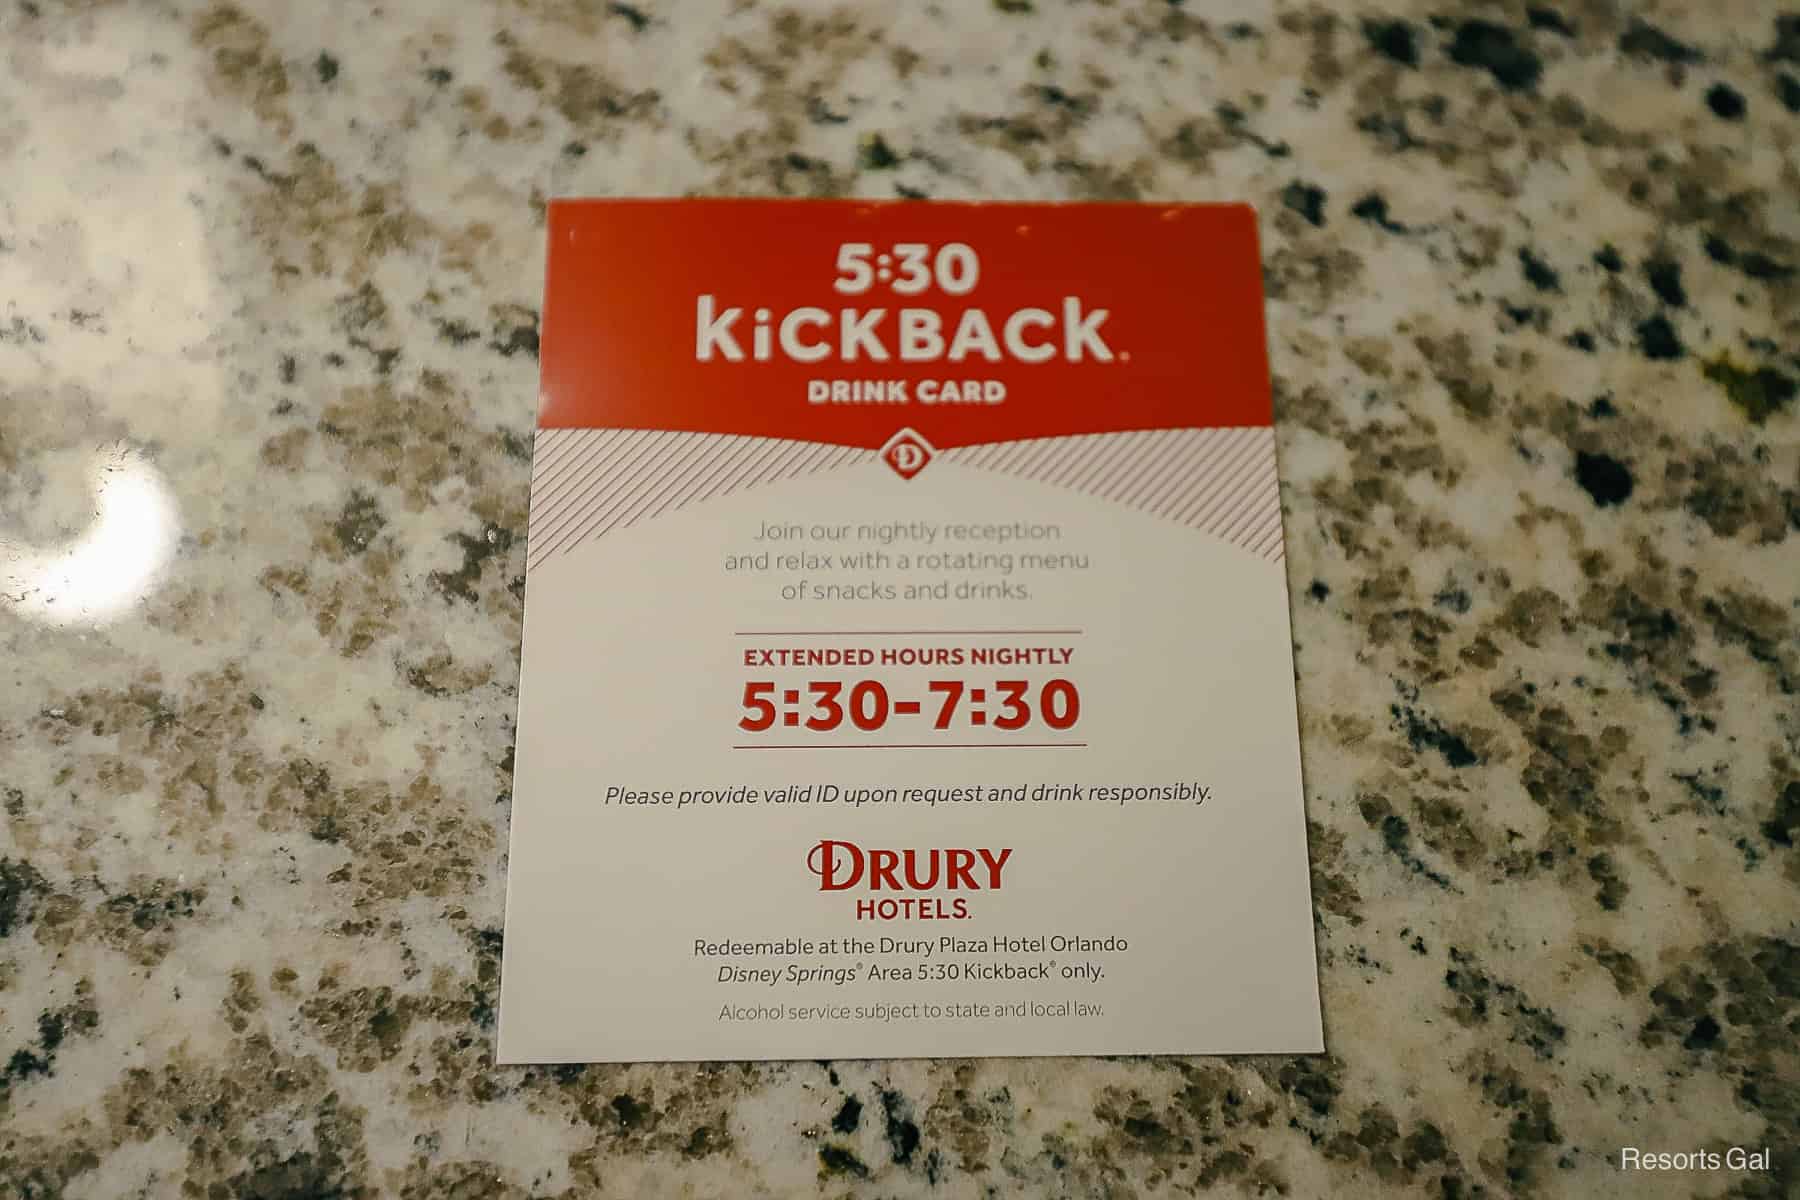 A Kickback drink card that allows guests of the Disney Springs Drury Hotel to receive complimentary snacks, drinks, and cocktails. 